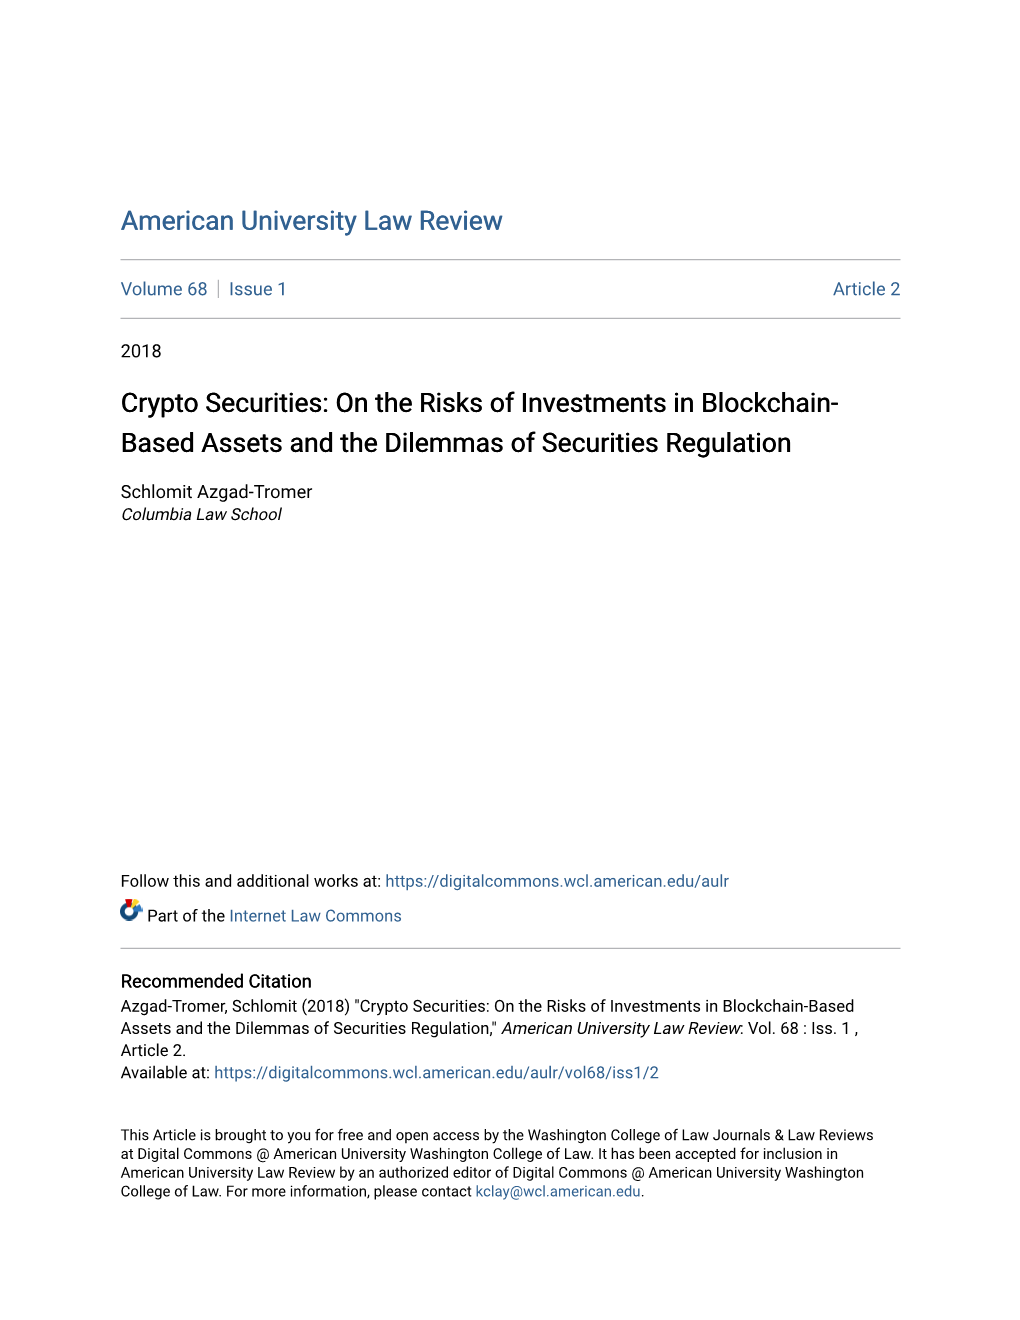 Crypto Securities: on the Risks of Investments in Blockchain-Based Assets and the Dilemmas of Securities Regulation," American University Law Review: Vol